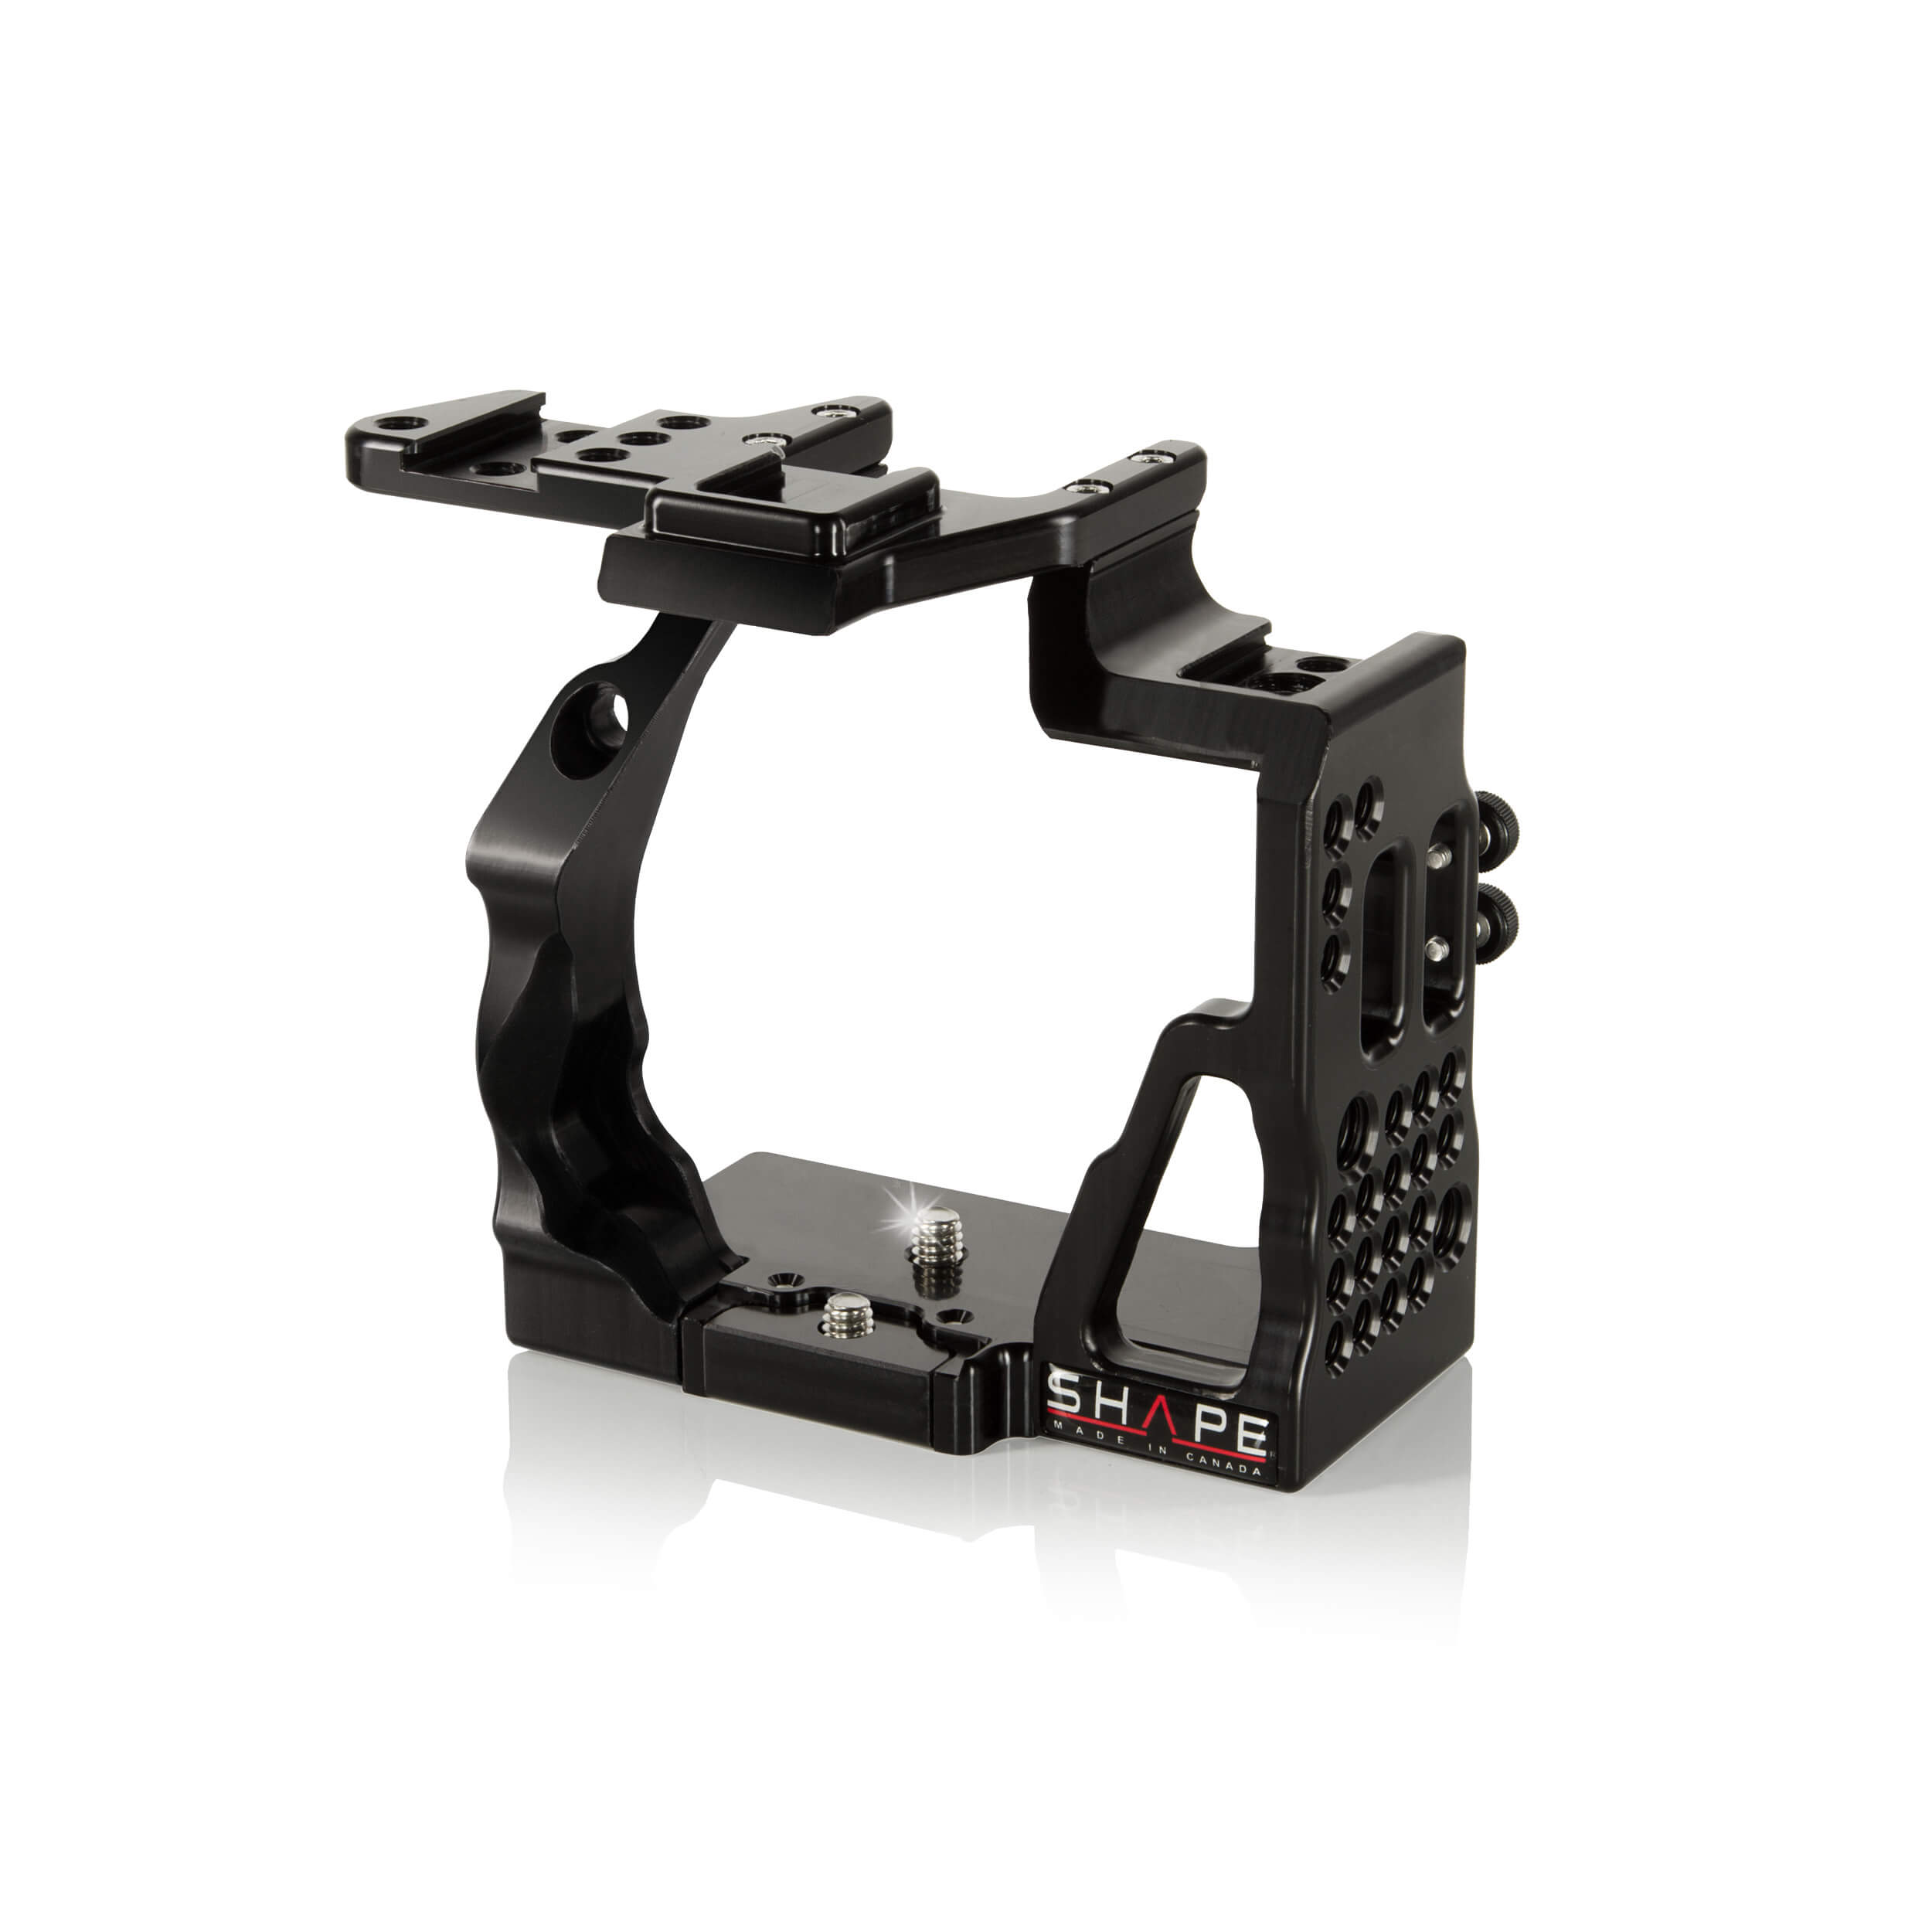 SHAPE Cage with Shoulder Mount System for Sony a7 II, a7S II, & a7R II